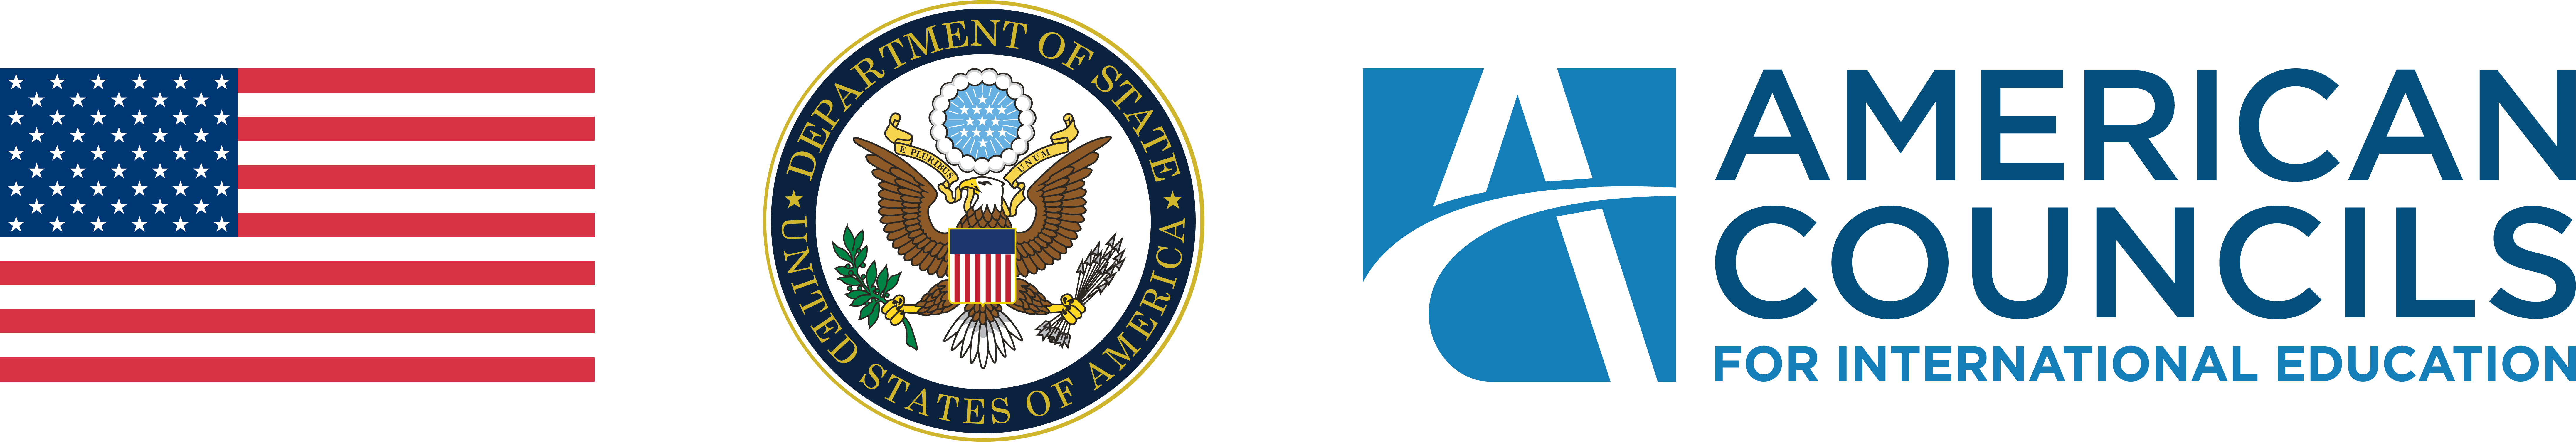 U.S. Department of State and American Councils Logos